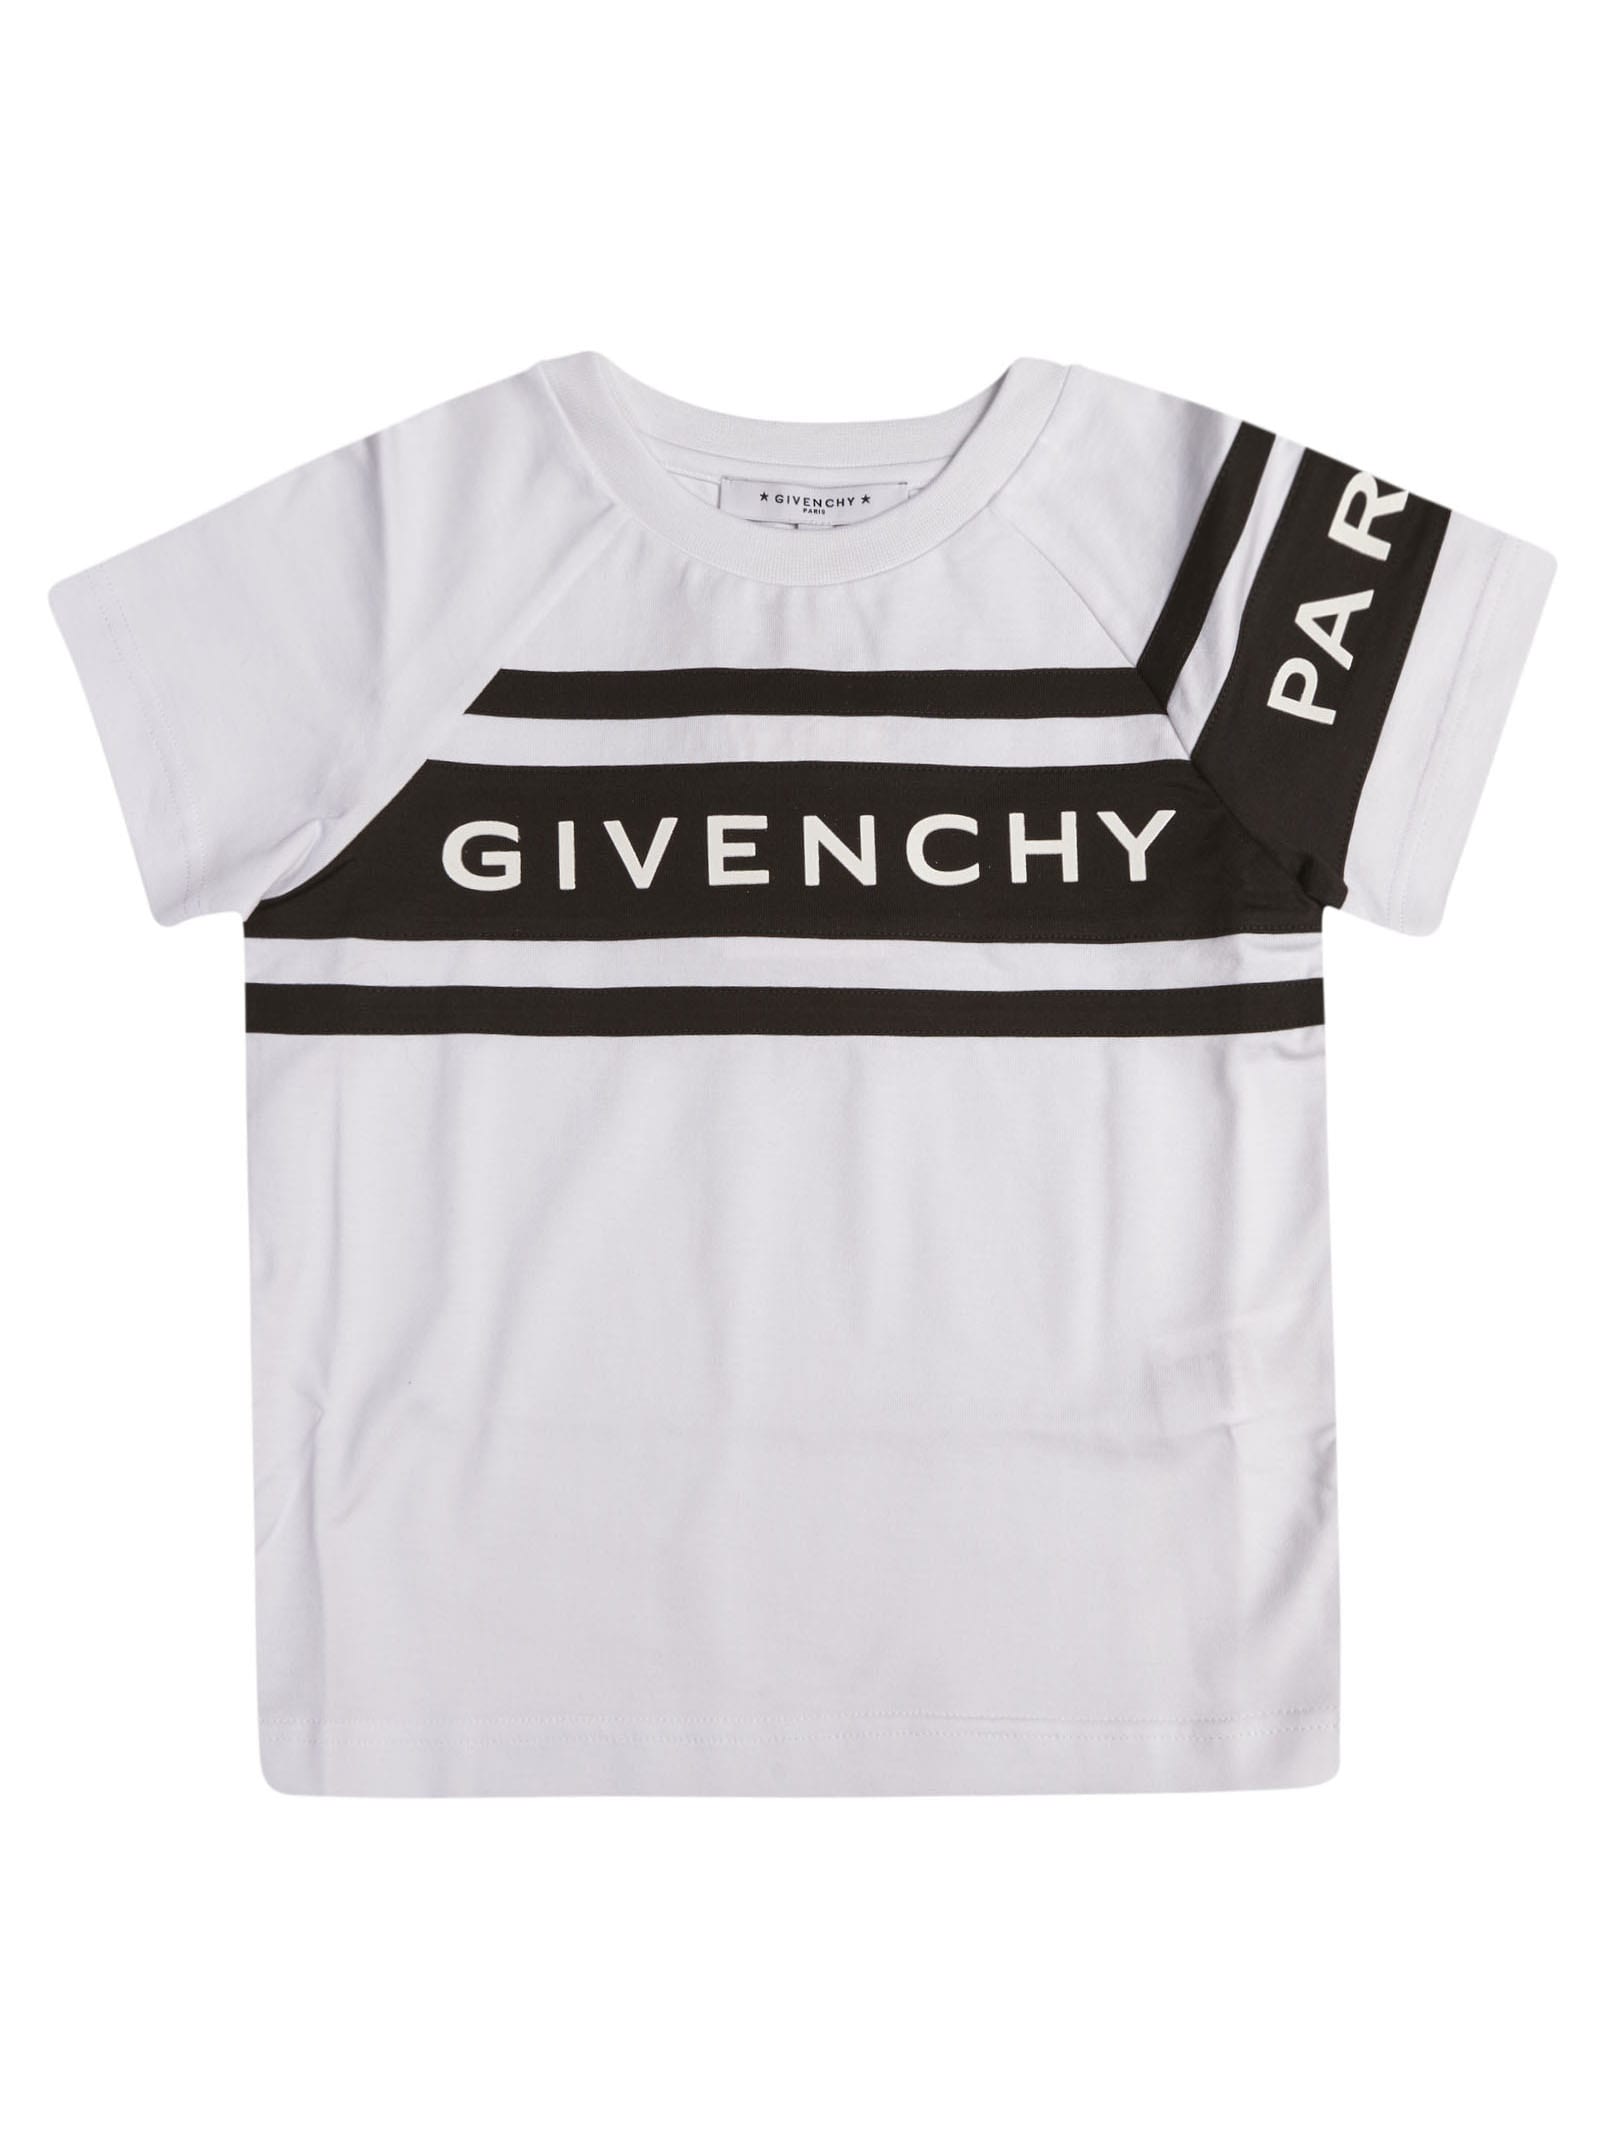 GIVENCHY WHITE T-SHIRT WITH BLACK PRESS AND LOGO,11222331